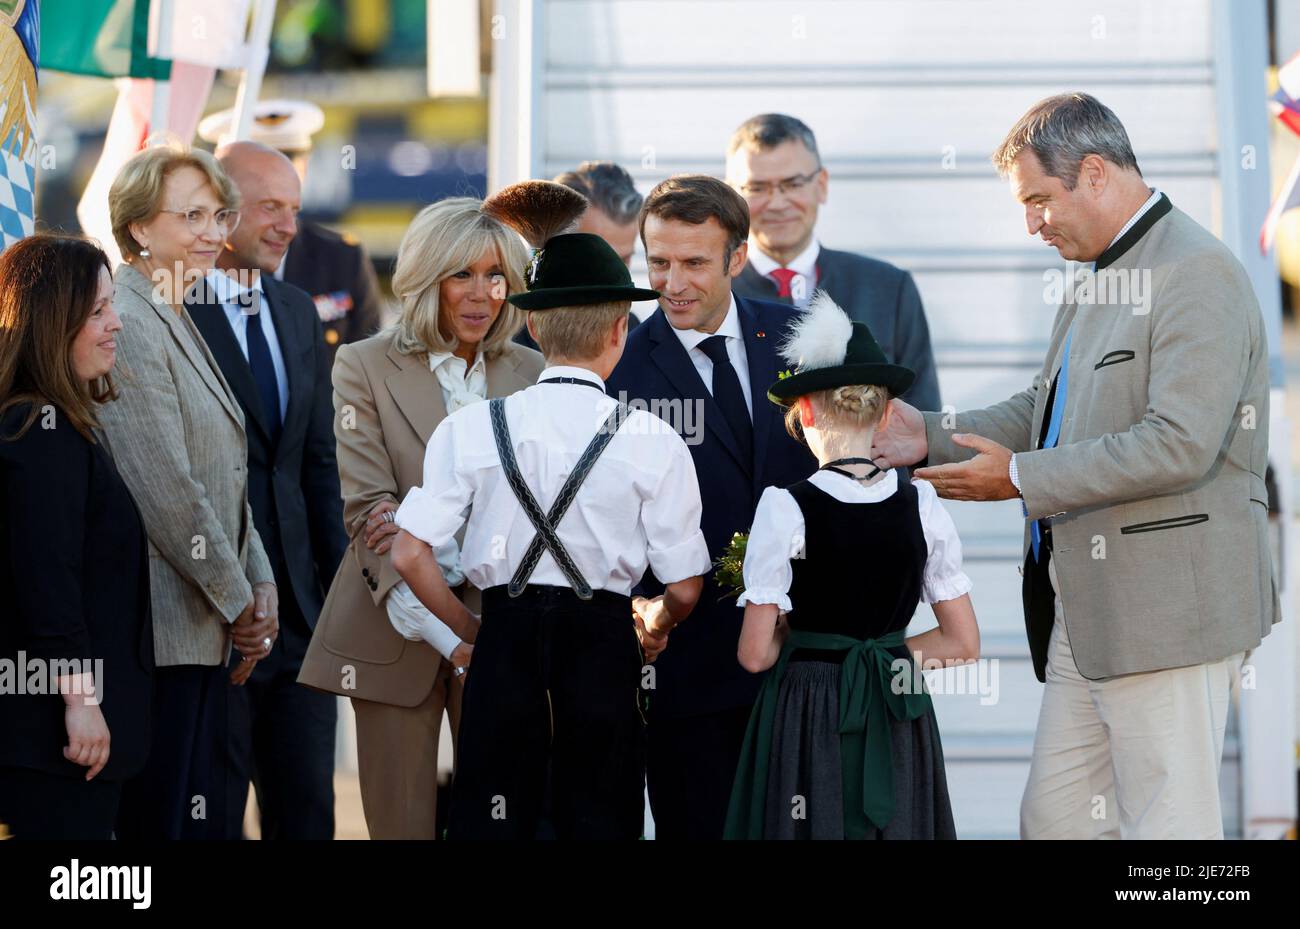 Children in traditional Bavarian clothes welcome French President Emmanuel Macron and his wife Brigitte Macron as they arrive at Franz-Josef-Strauss airport in Munich ahead of the G7 summit, which will take place in the Bavarian alpine resort of Elmau Castle, Germany, June 25, 2022. REUTERS/Michaela Rehle Stock Photo